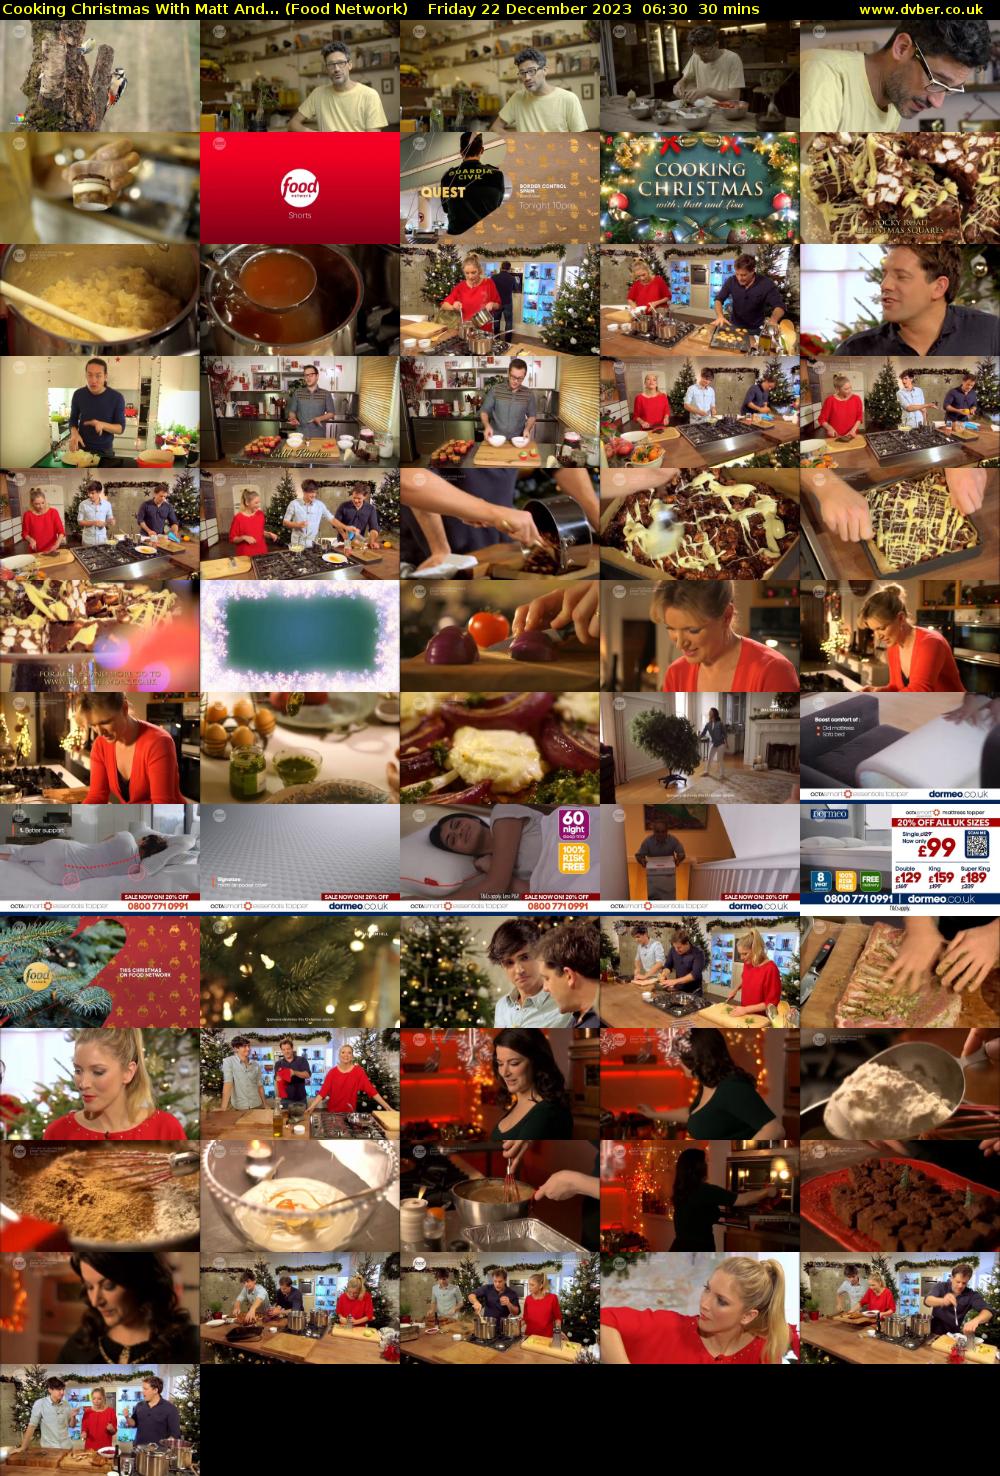 Cooking Christmas With Matt And... (Food Network) Friday 22 December 2023 06:30 - 07:00